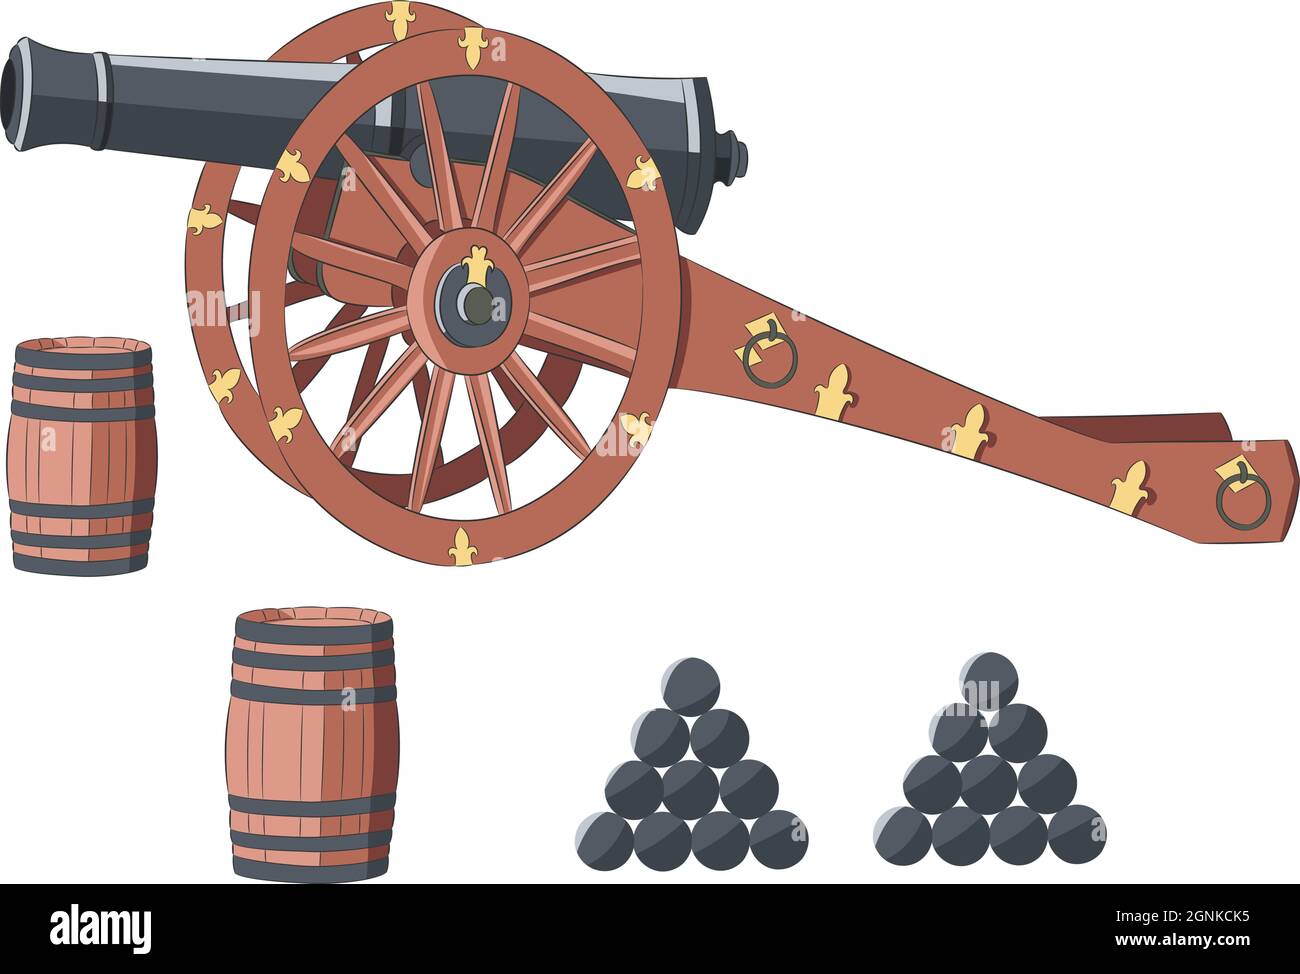 Cannons. stock image. Image of wheel, powerful, charge - 54064817